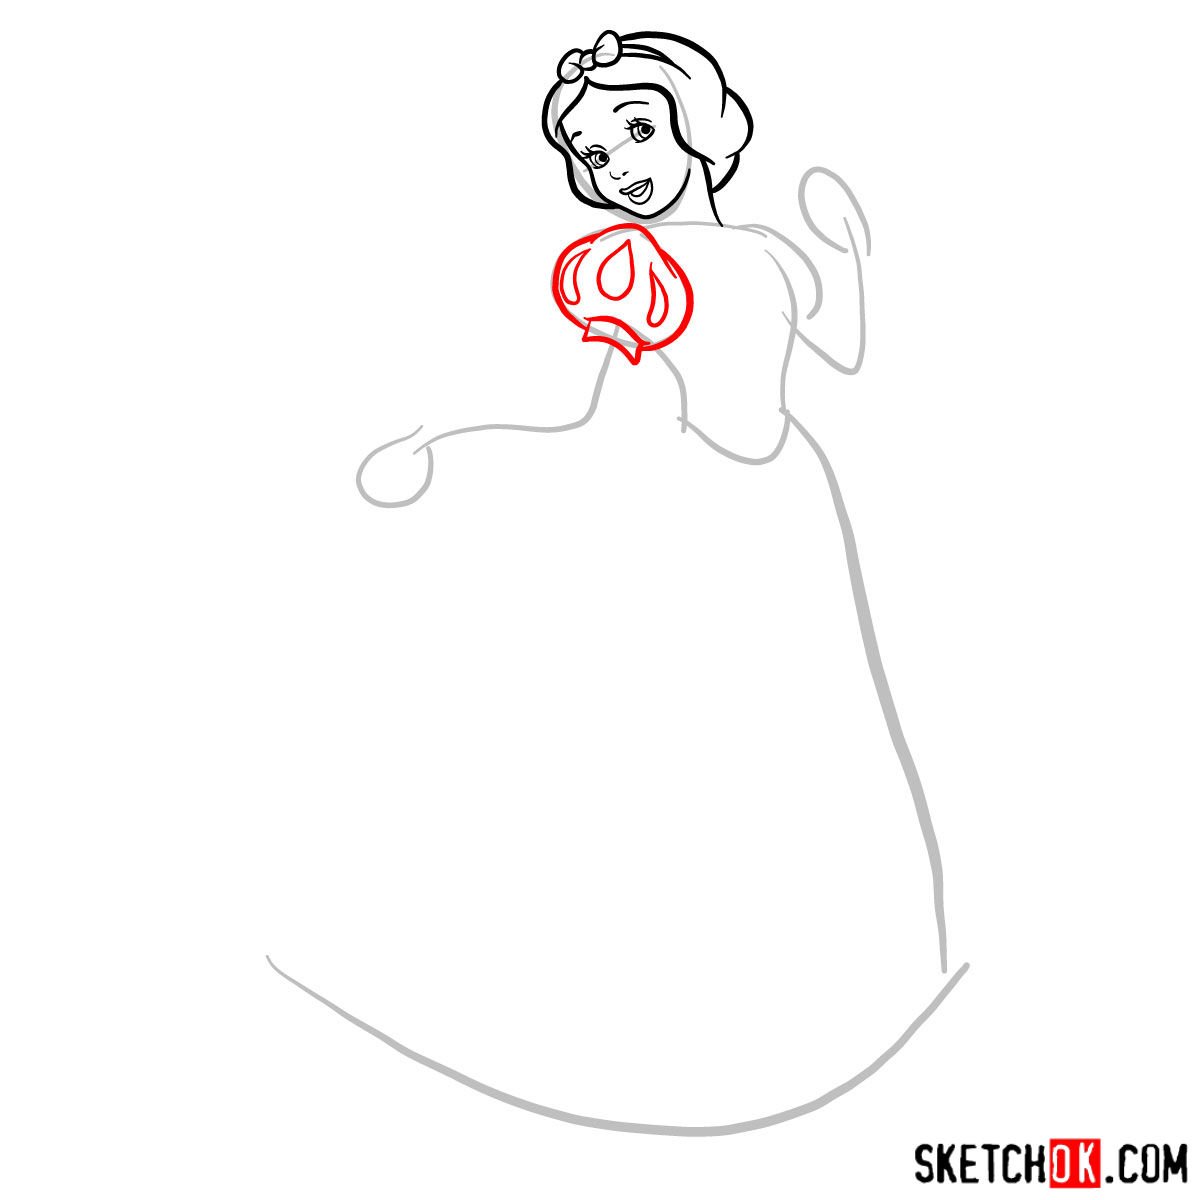 How to draw Snow White - step 05